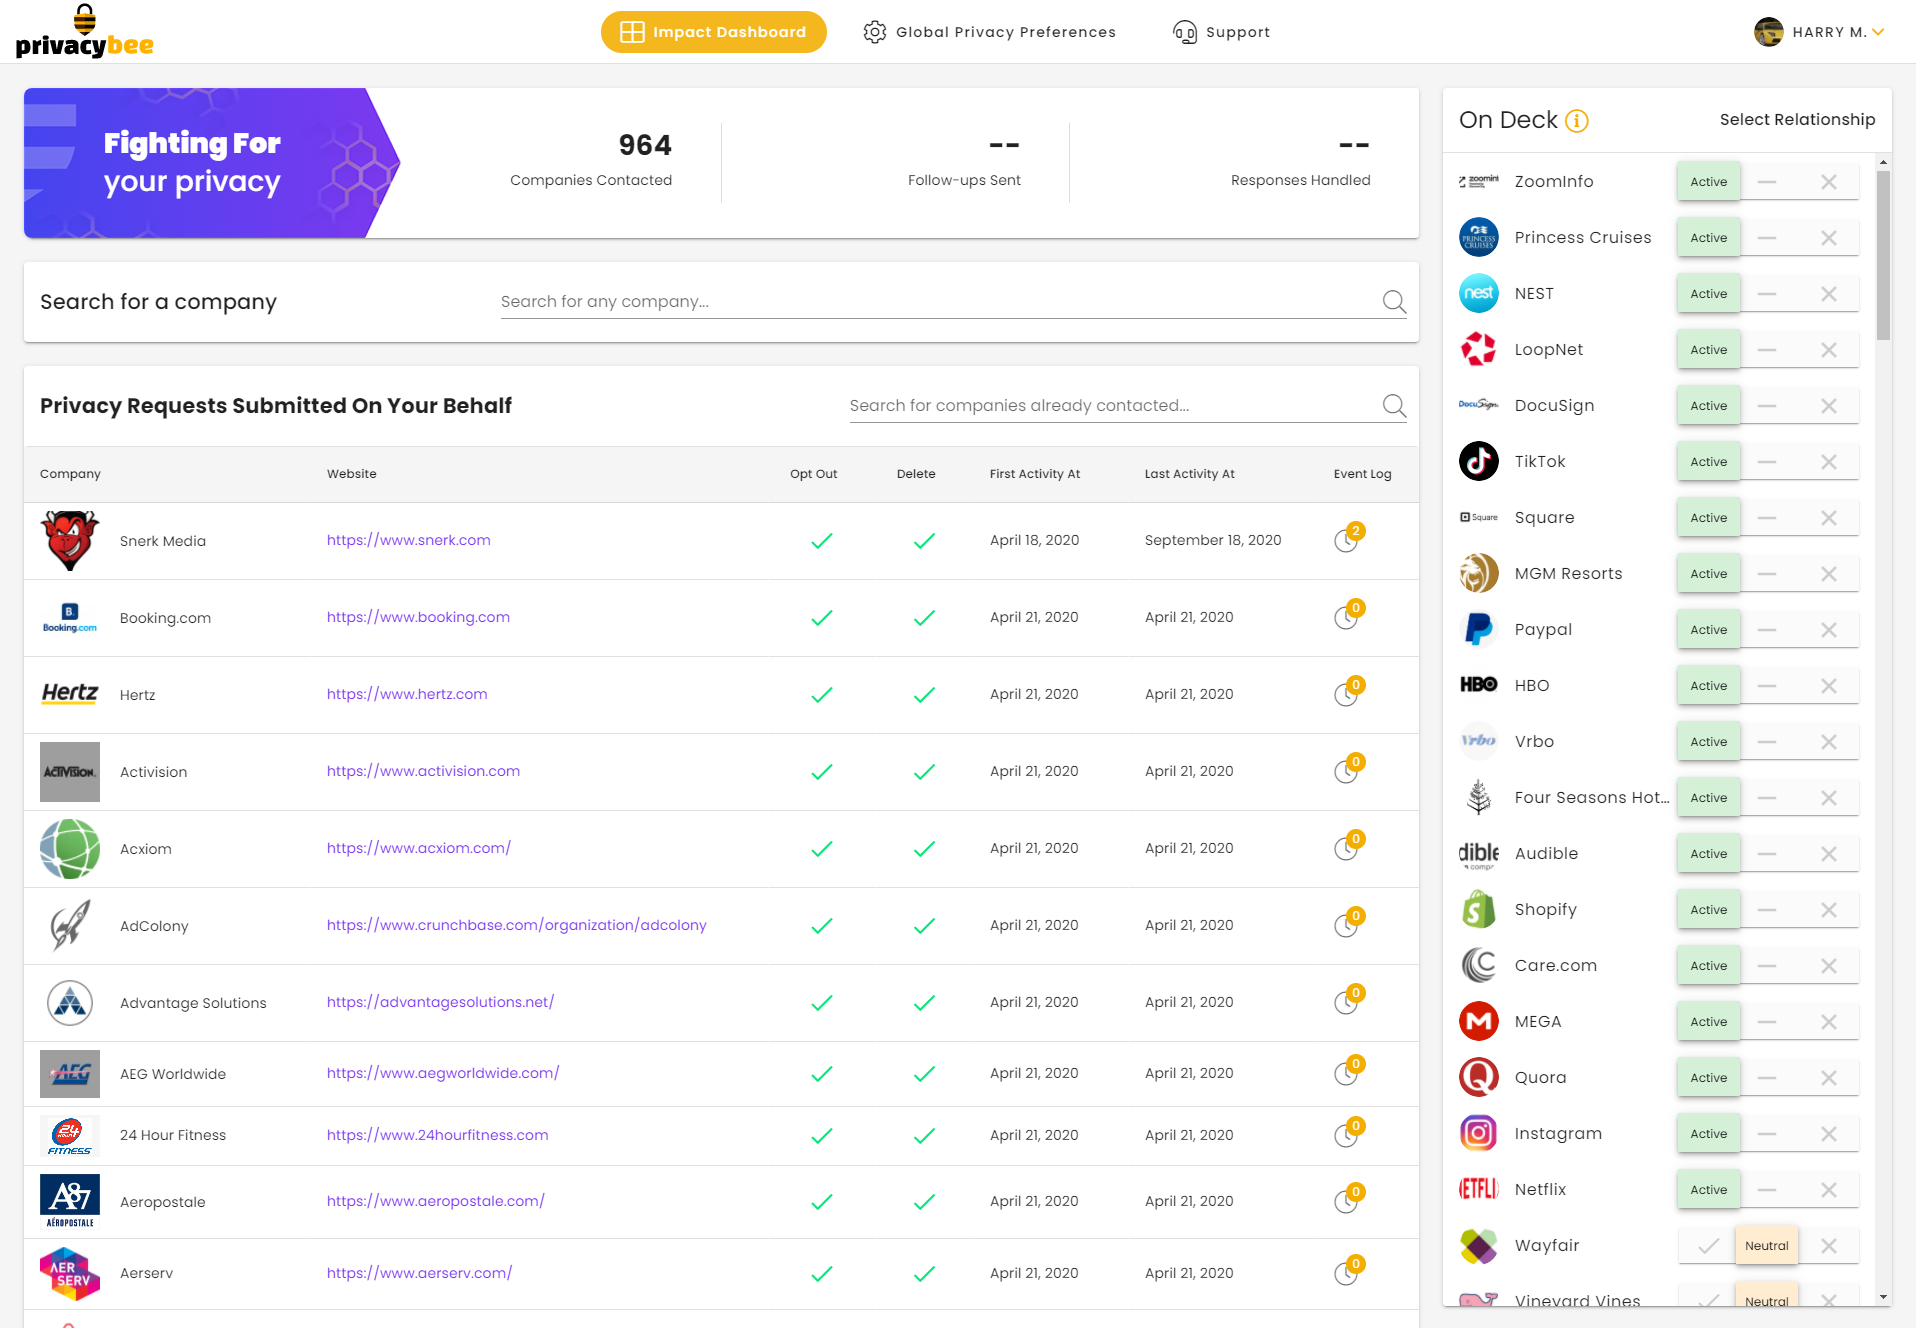 The Privacy Dashboard is where users manage their privacy preferences across companies.